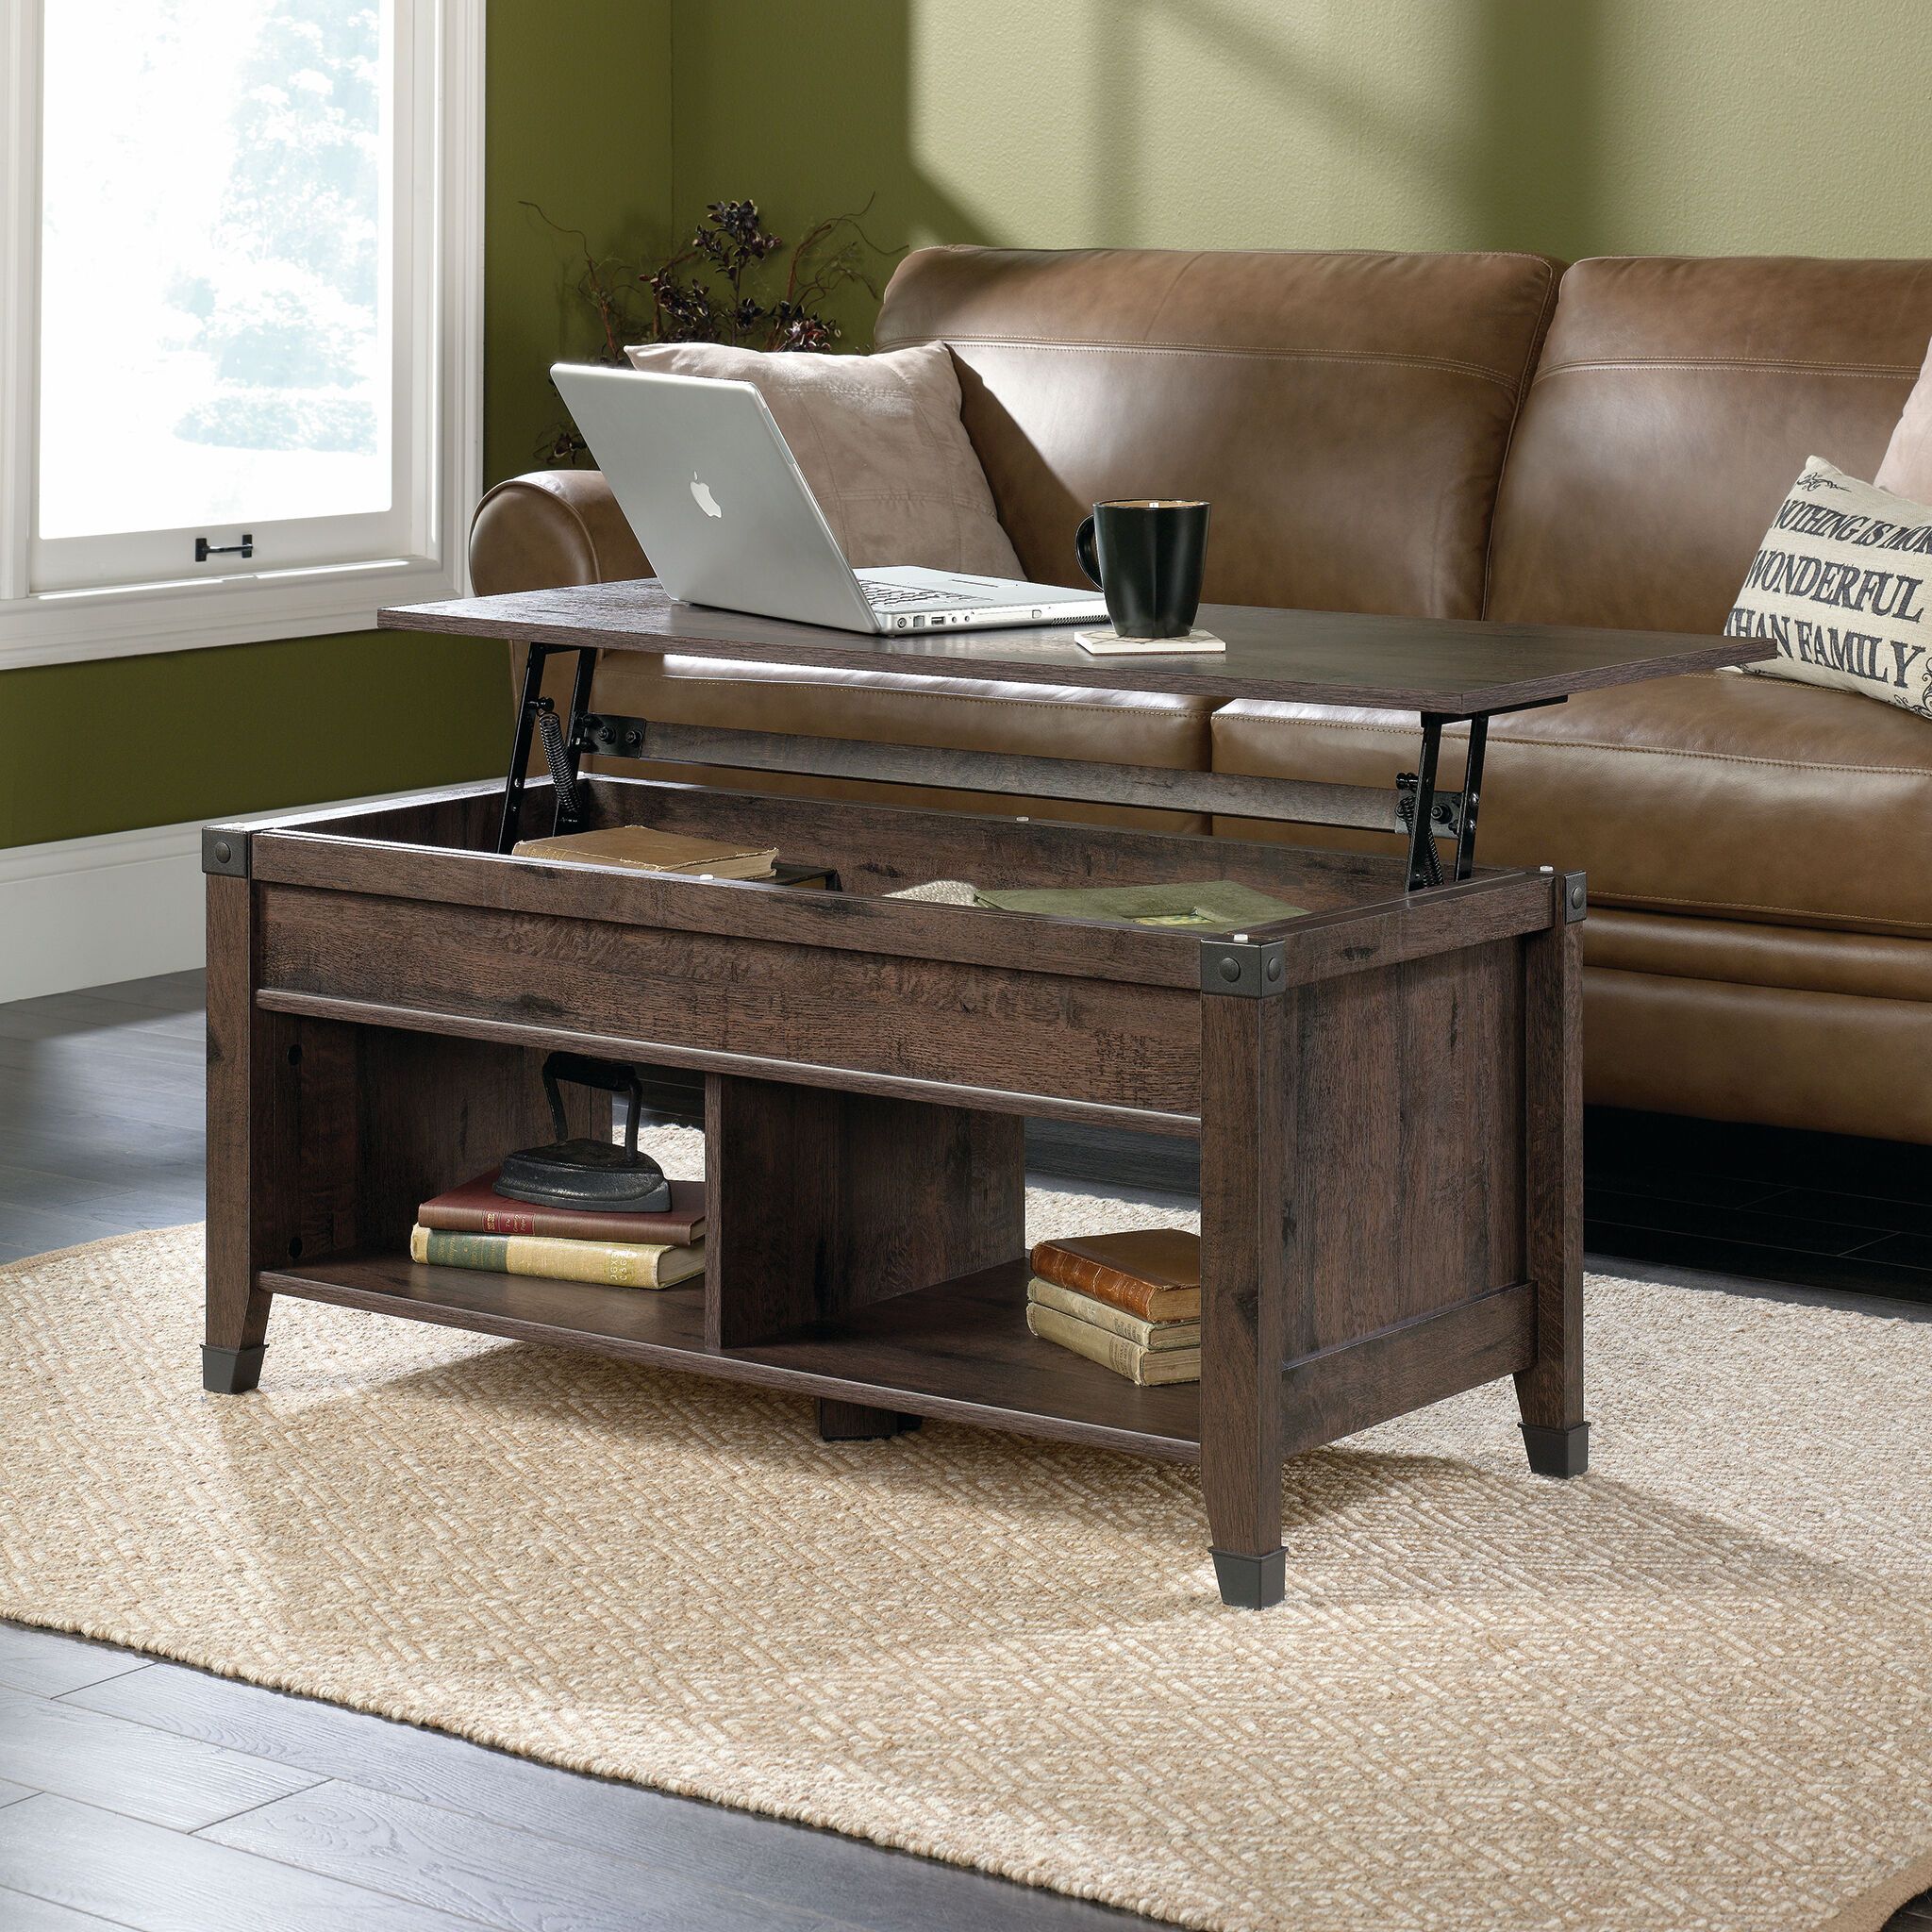 Rectangular Lift Top Contemporary Coffee Table In Coffee Oak | Mathis For Lift Top Coffee Tables (View 6 of 15)